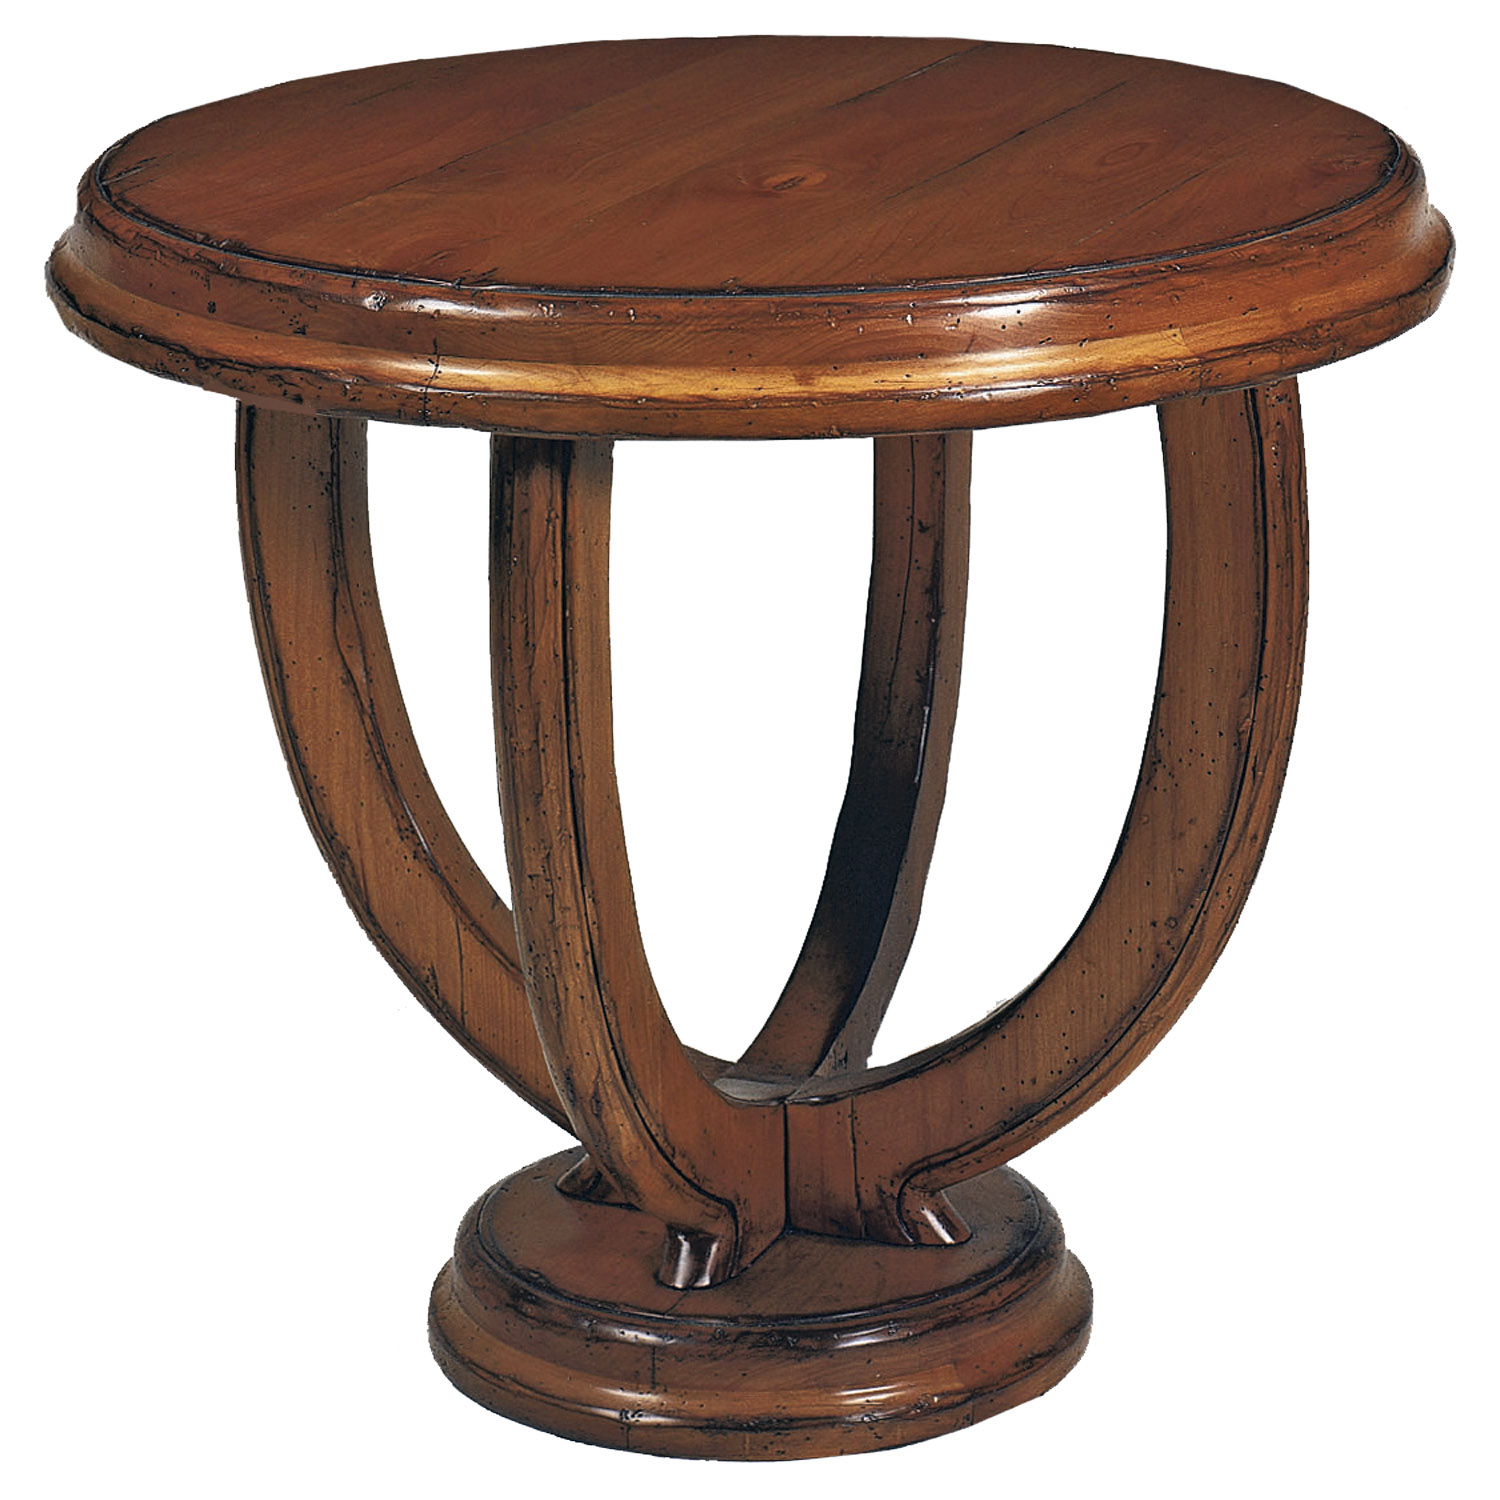 Marcel traditional stained and distressed round side table by Woodland furniture in Idaho Falls